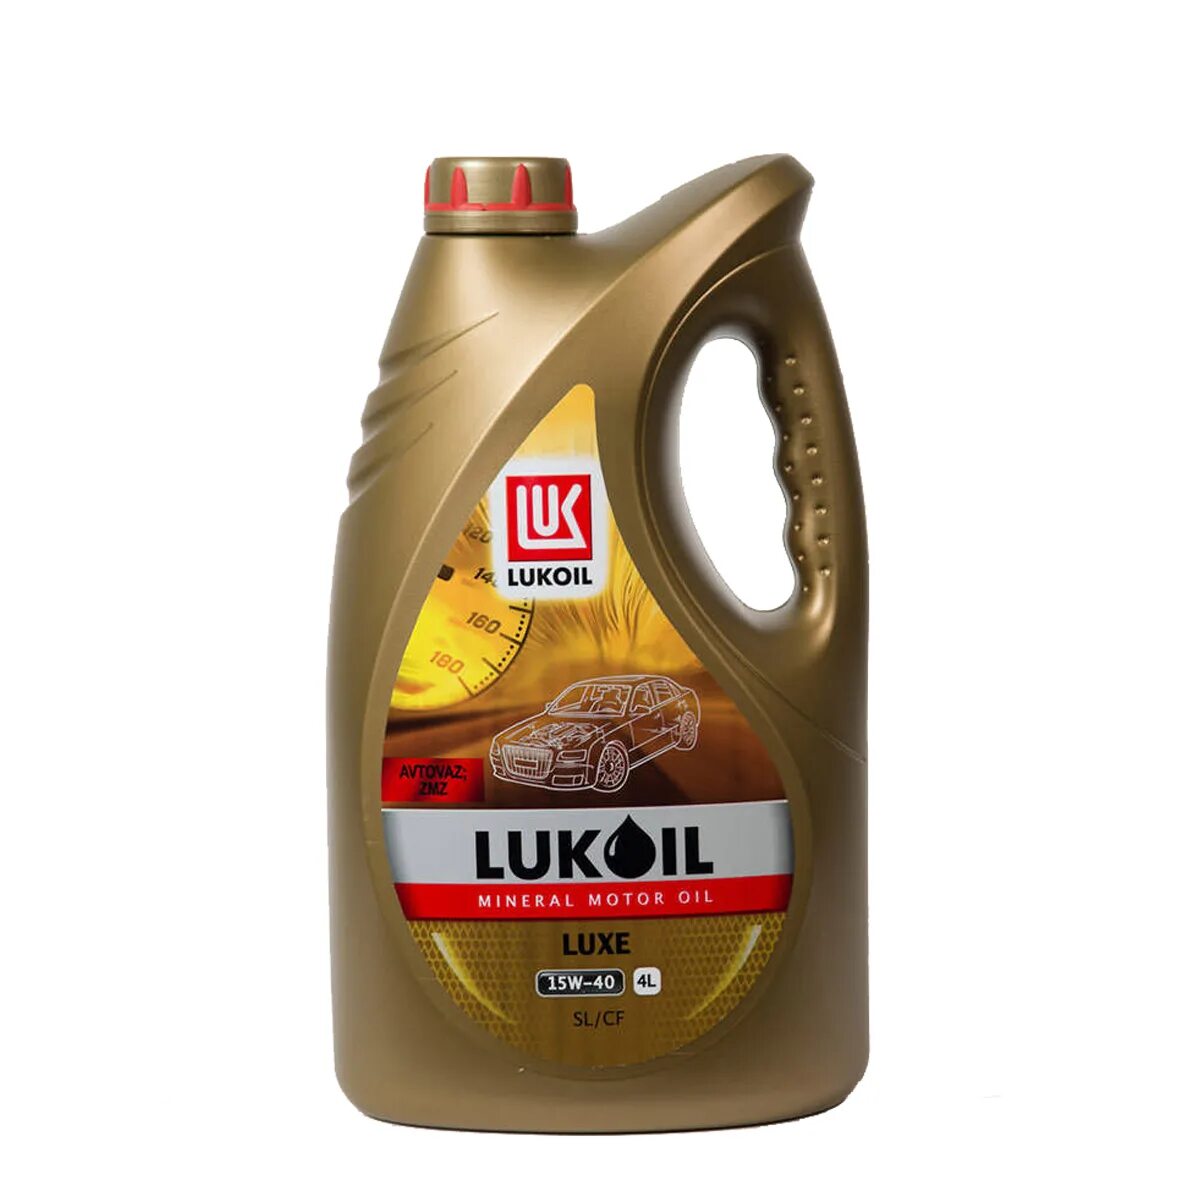 Lukoil Luxe 15w-40. Лукойл Люкс 10w30. Lukoil. Sae15w40. Масло Luxe 15w40 минеральное.